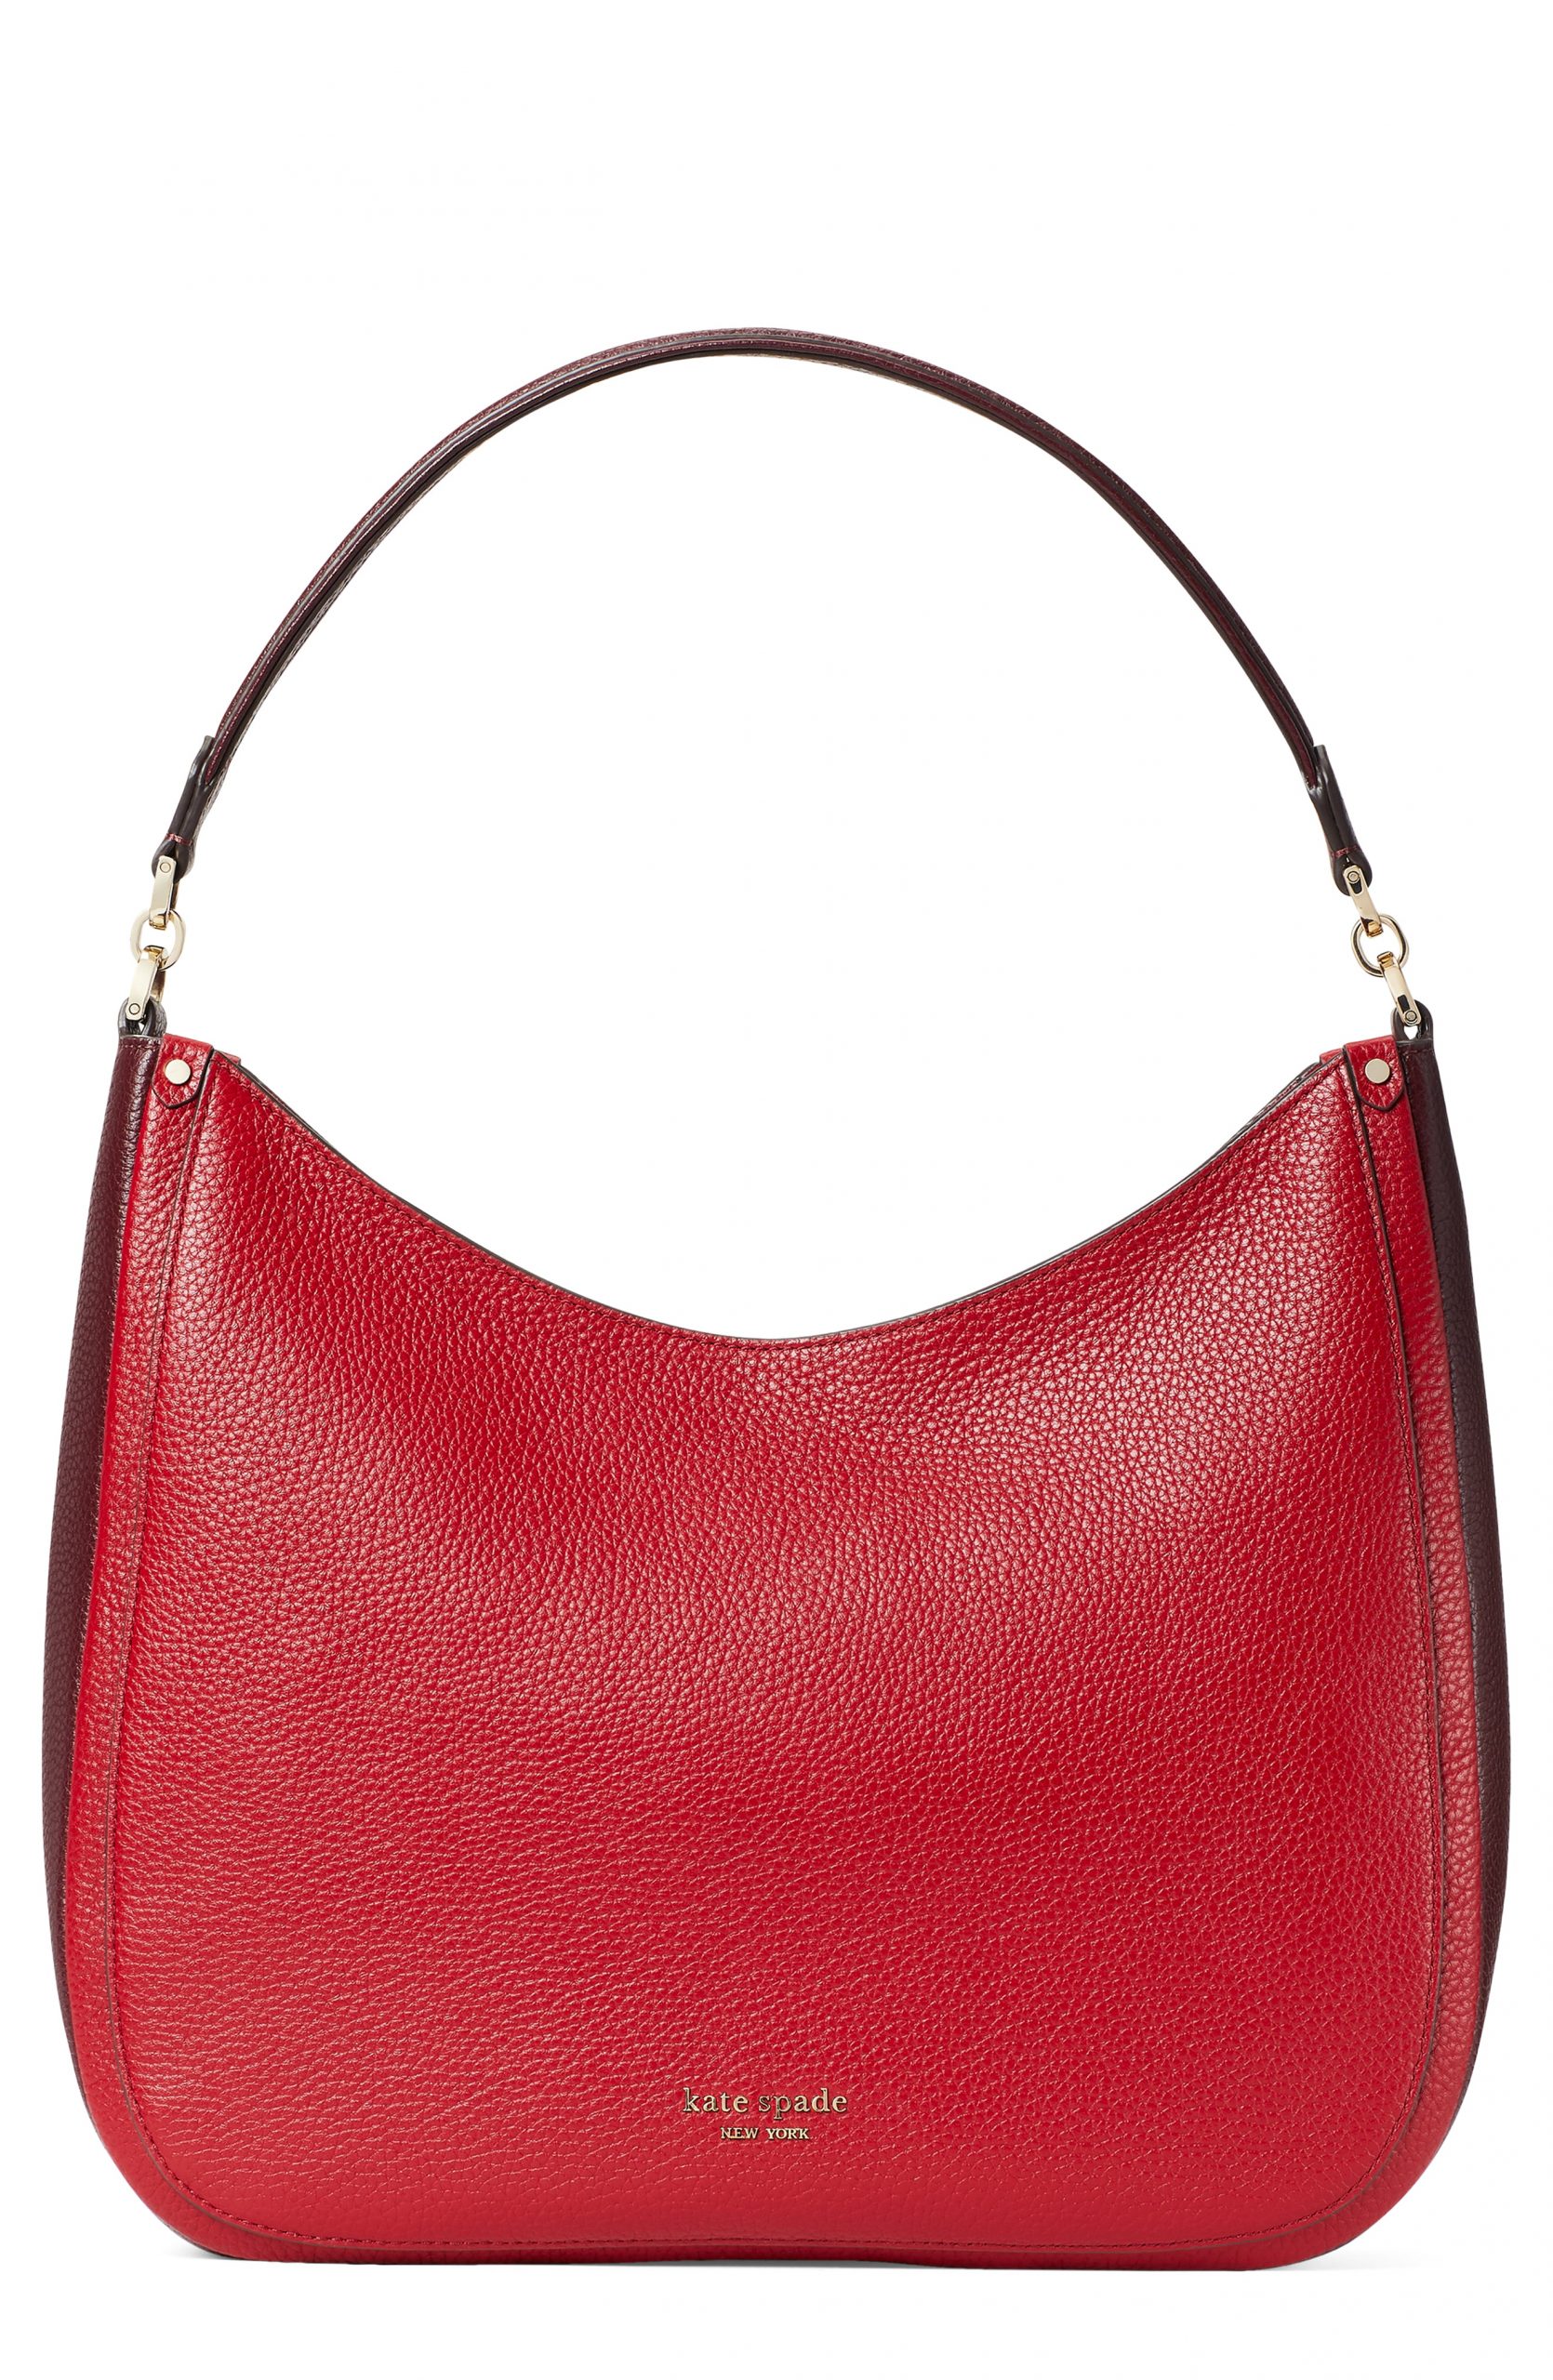 Kate Spade New York Roulette Large Leather Hobo Bag - Red | Fashion